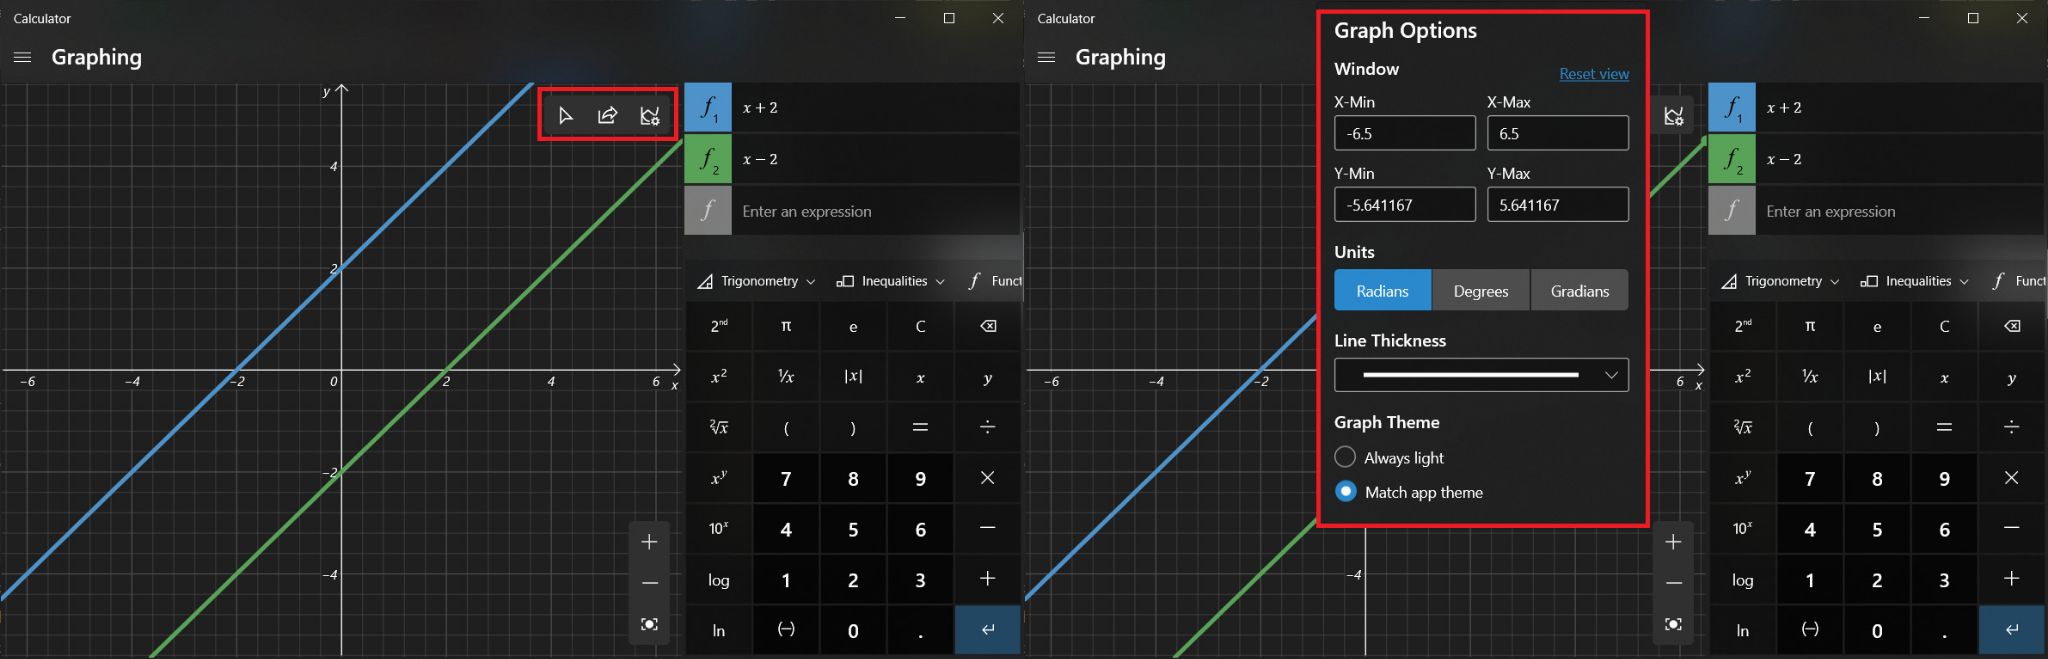 Once the equations are mapped, three new options become active at the top right side of the graph Window. The first option lets you trace the plotted lines using the mouse or keyboard, the next one is to share the graph via mail and the last one allows you to customize the graph. You can change the minimum and maximum values of X and Y, switch between different units like degrees, radians, and gradians, adjust the line thickness and graph theme. How to Enable Calculator Graphing Mode in Windows 10